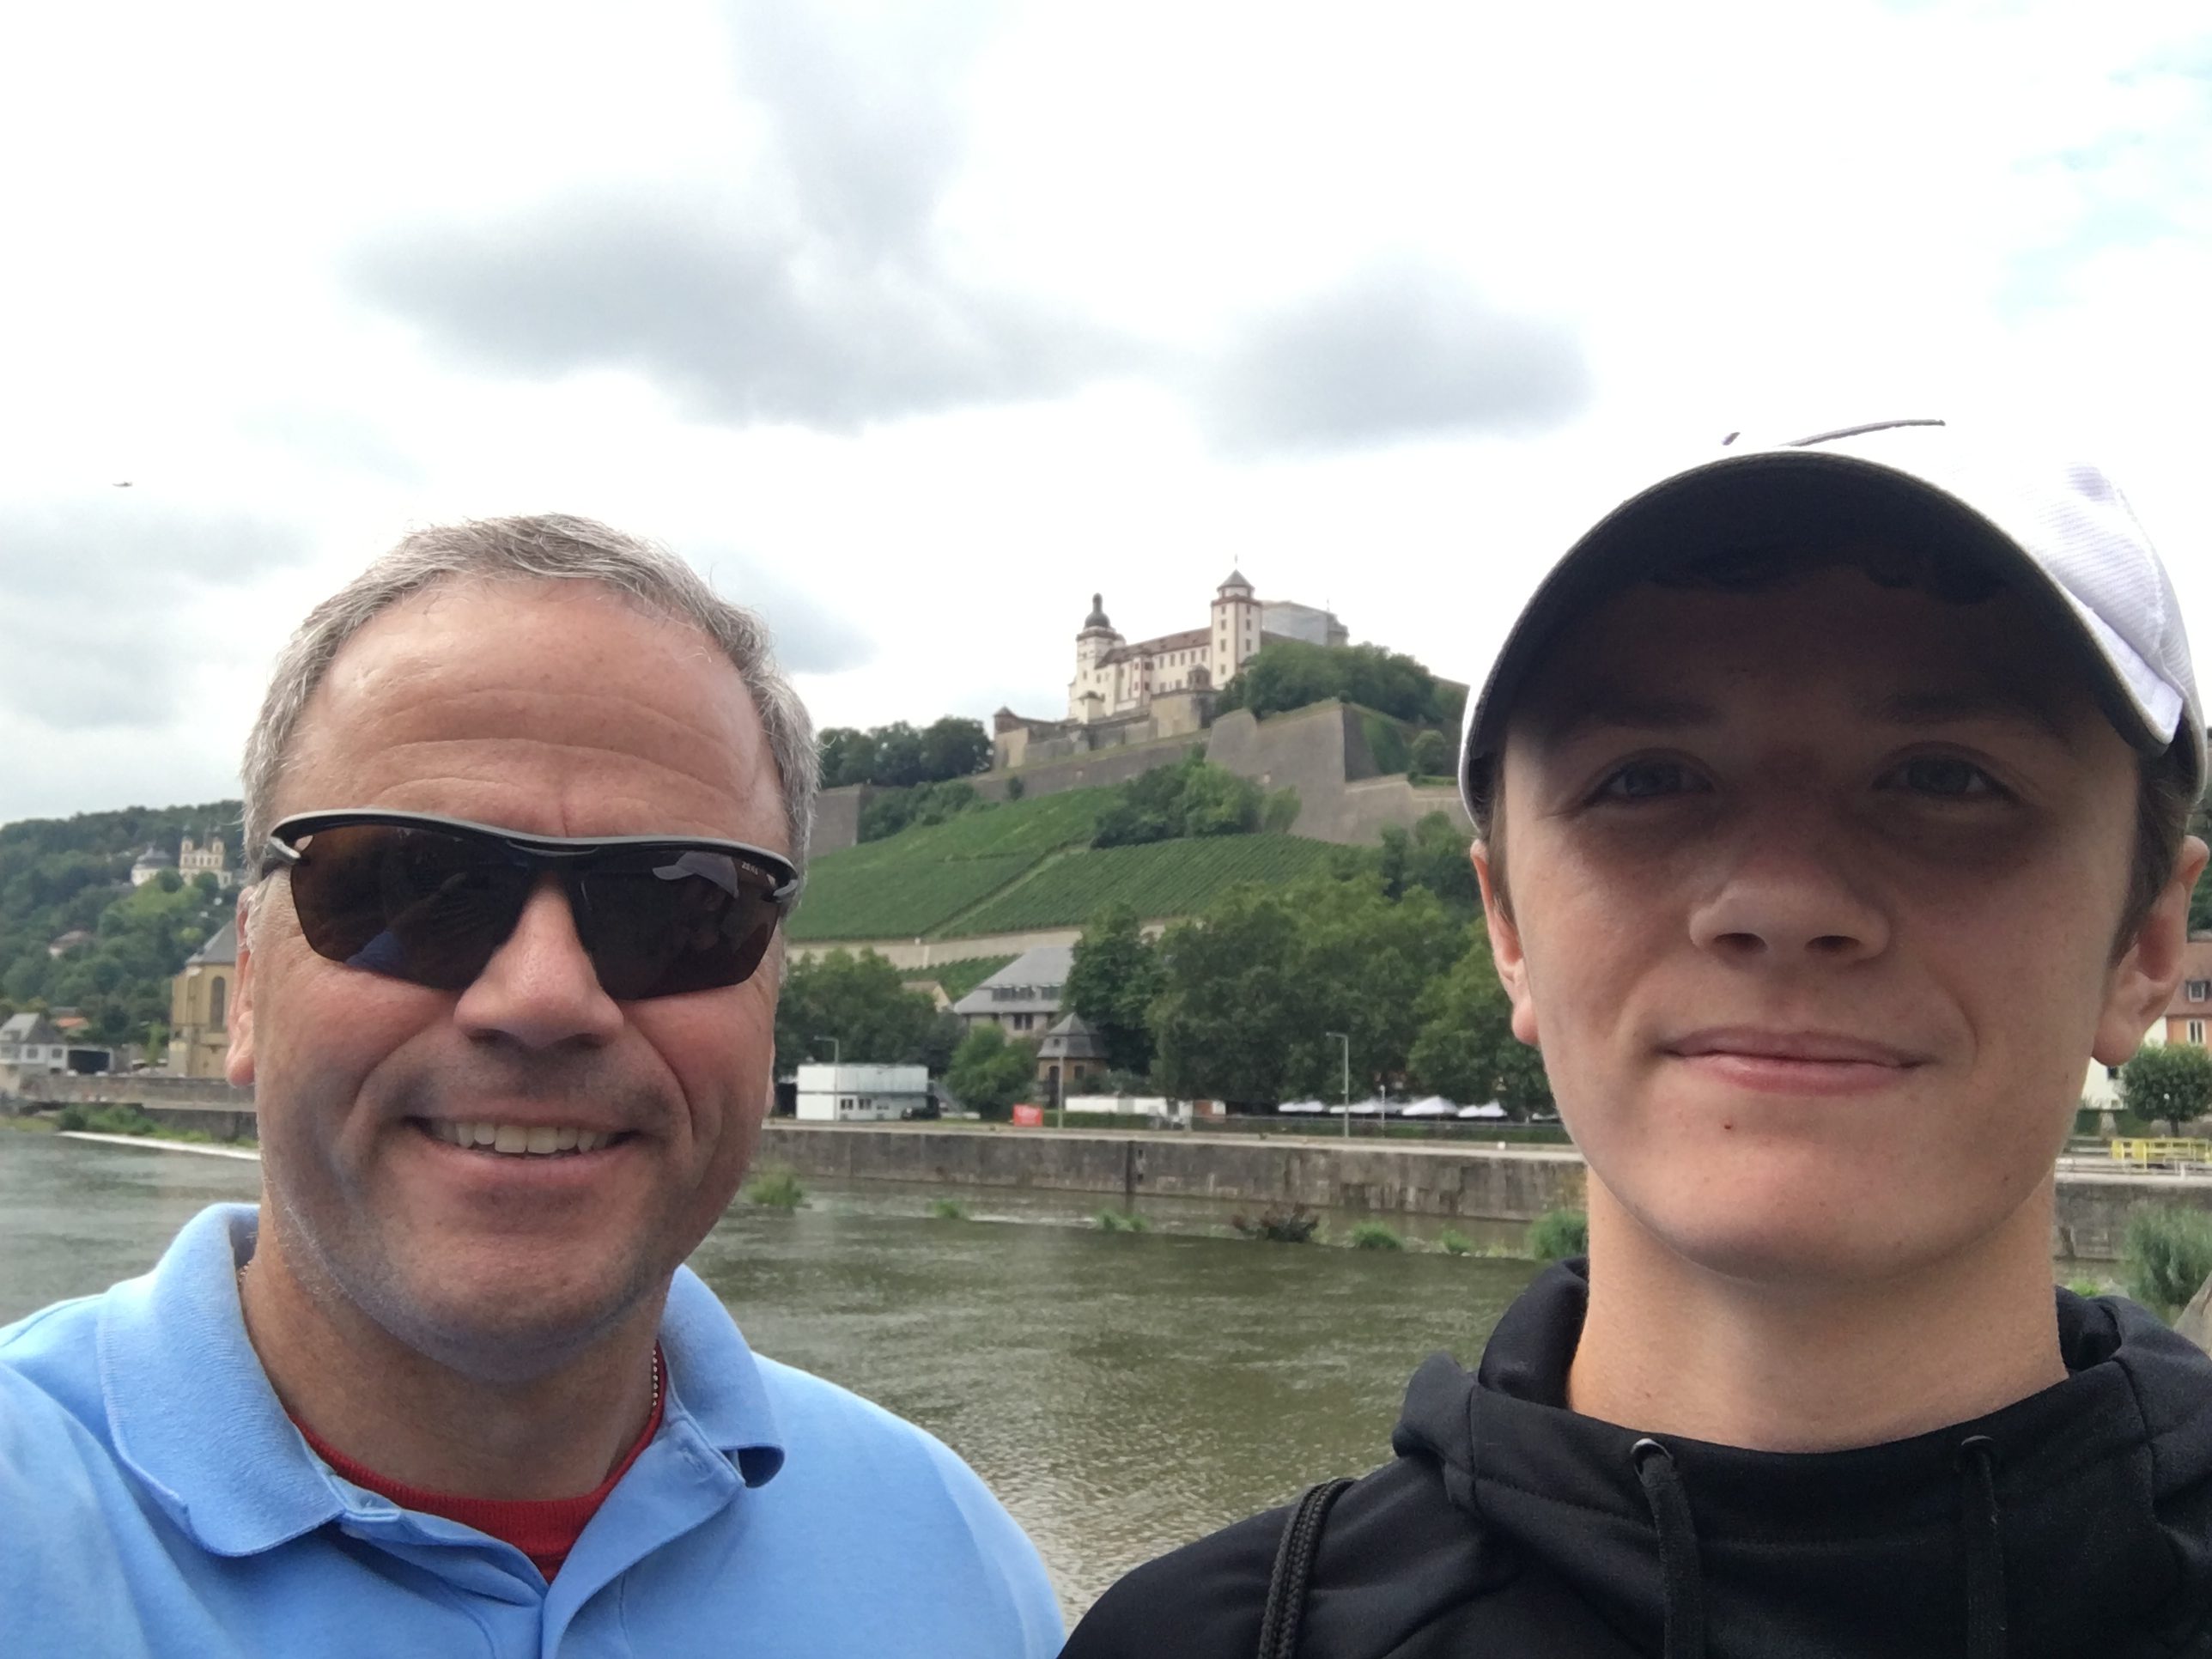 Gavin was born in Wurzburg. Riley and I visited there a few summers ago.